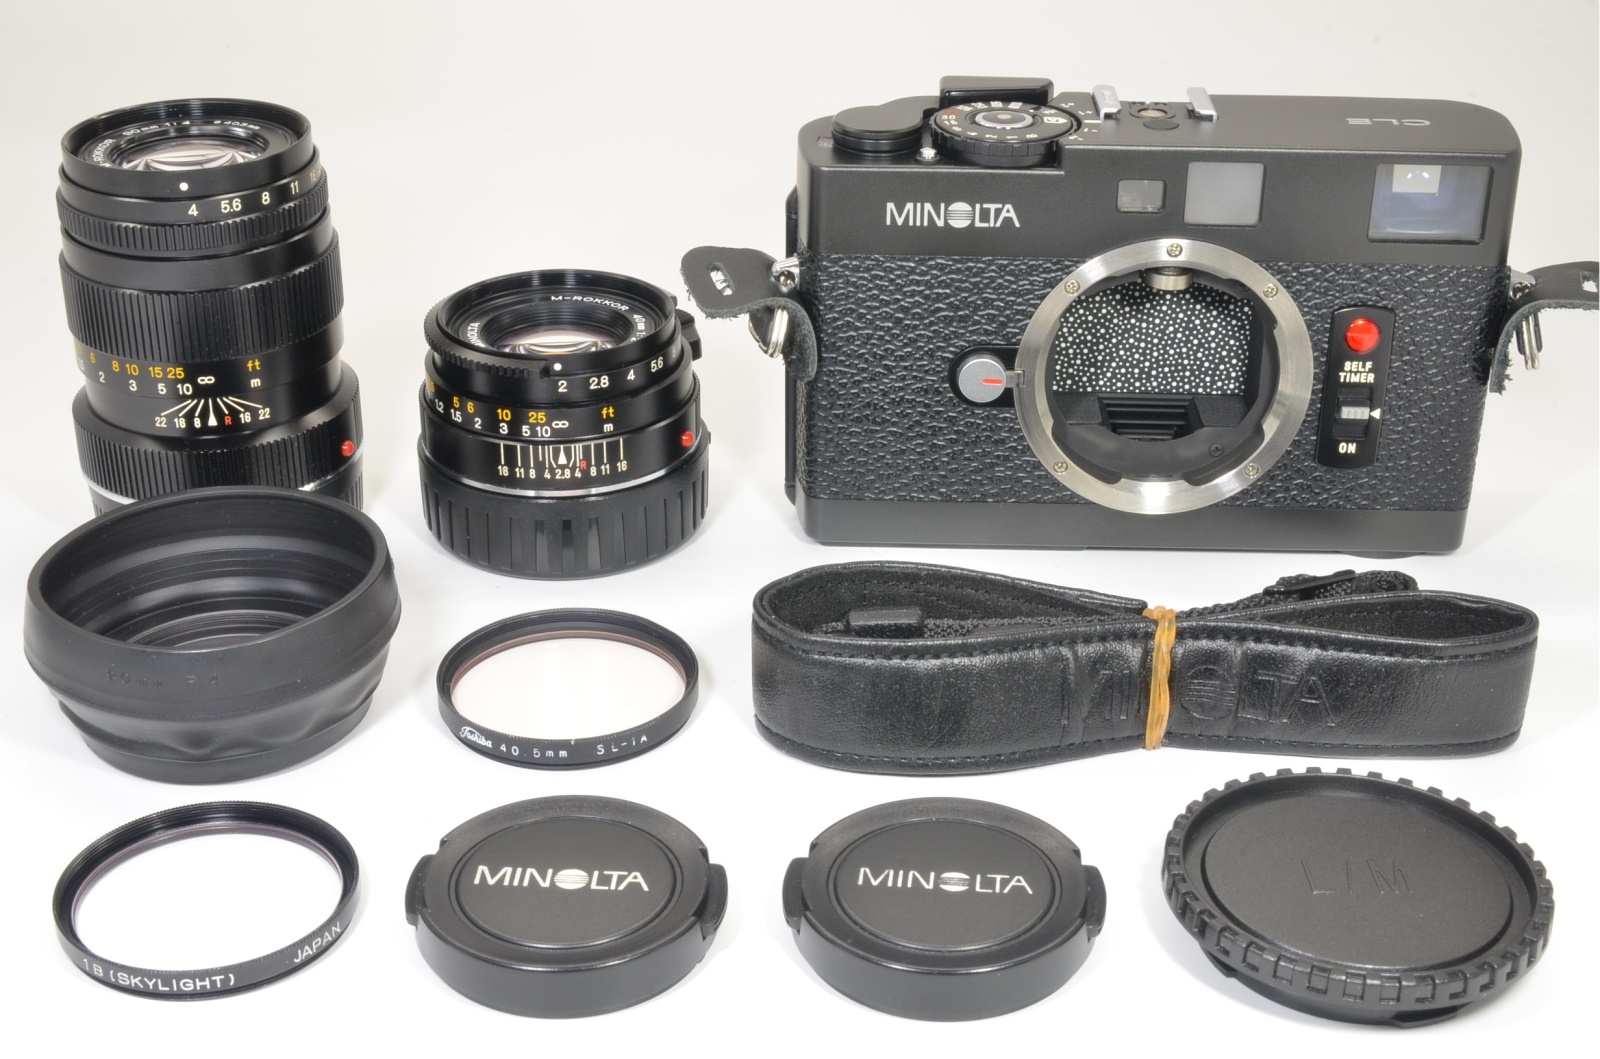 minolta cle film camera, lens m-rokkor 40mm f2 and 90mm f4 shooting tested